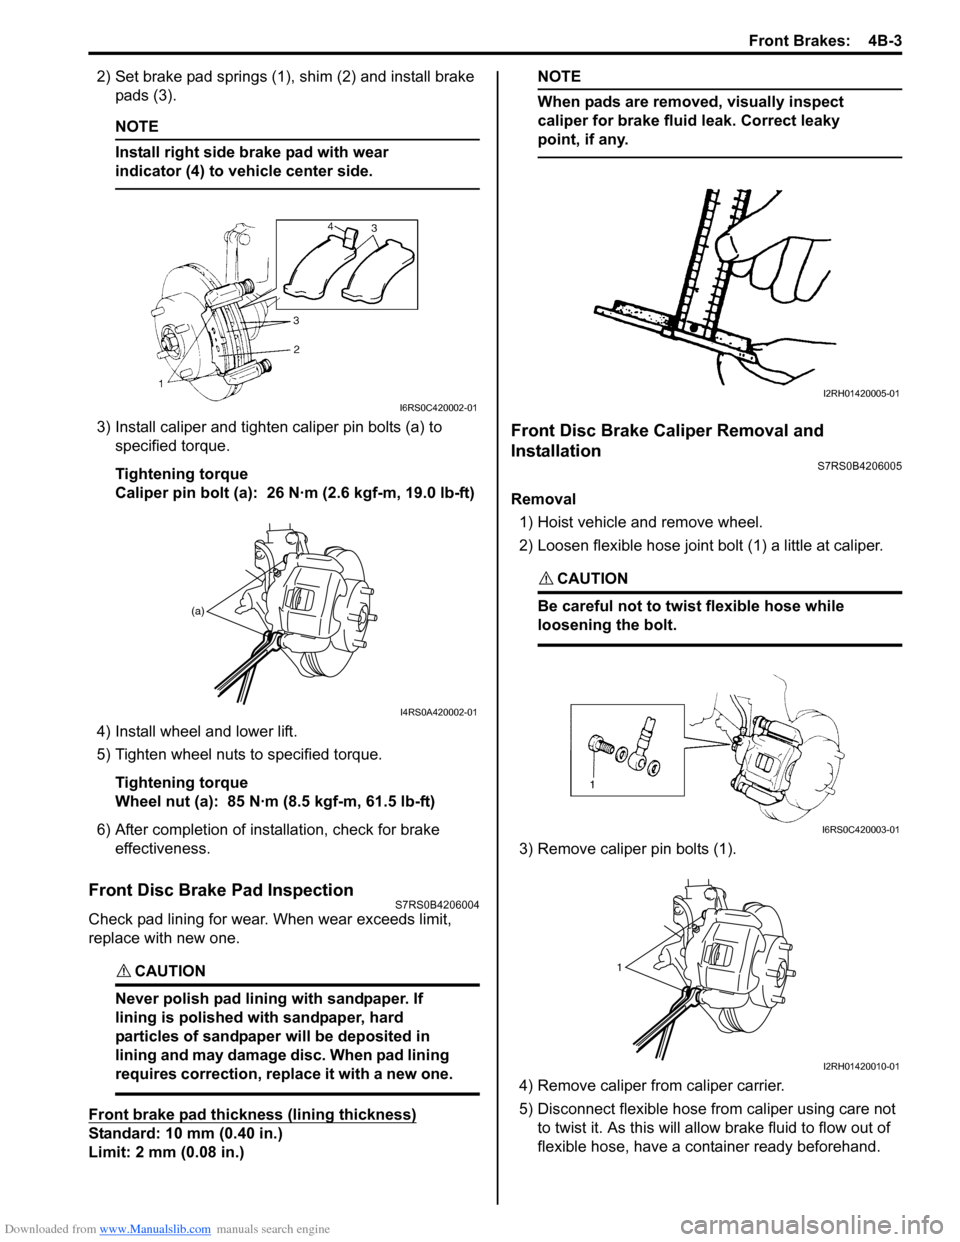 SUZUKI SWIFT 2005 2.G Service Owners Manual Downloaded from www.Manualslib.com manuals search engine Front Brakes:  4B-3
2) Set brake pad springs (1), shim (2) and install brake pads (3).
NOTE
Install right side brake pad with wear 
indicator (